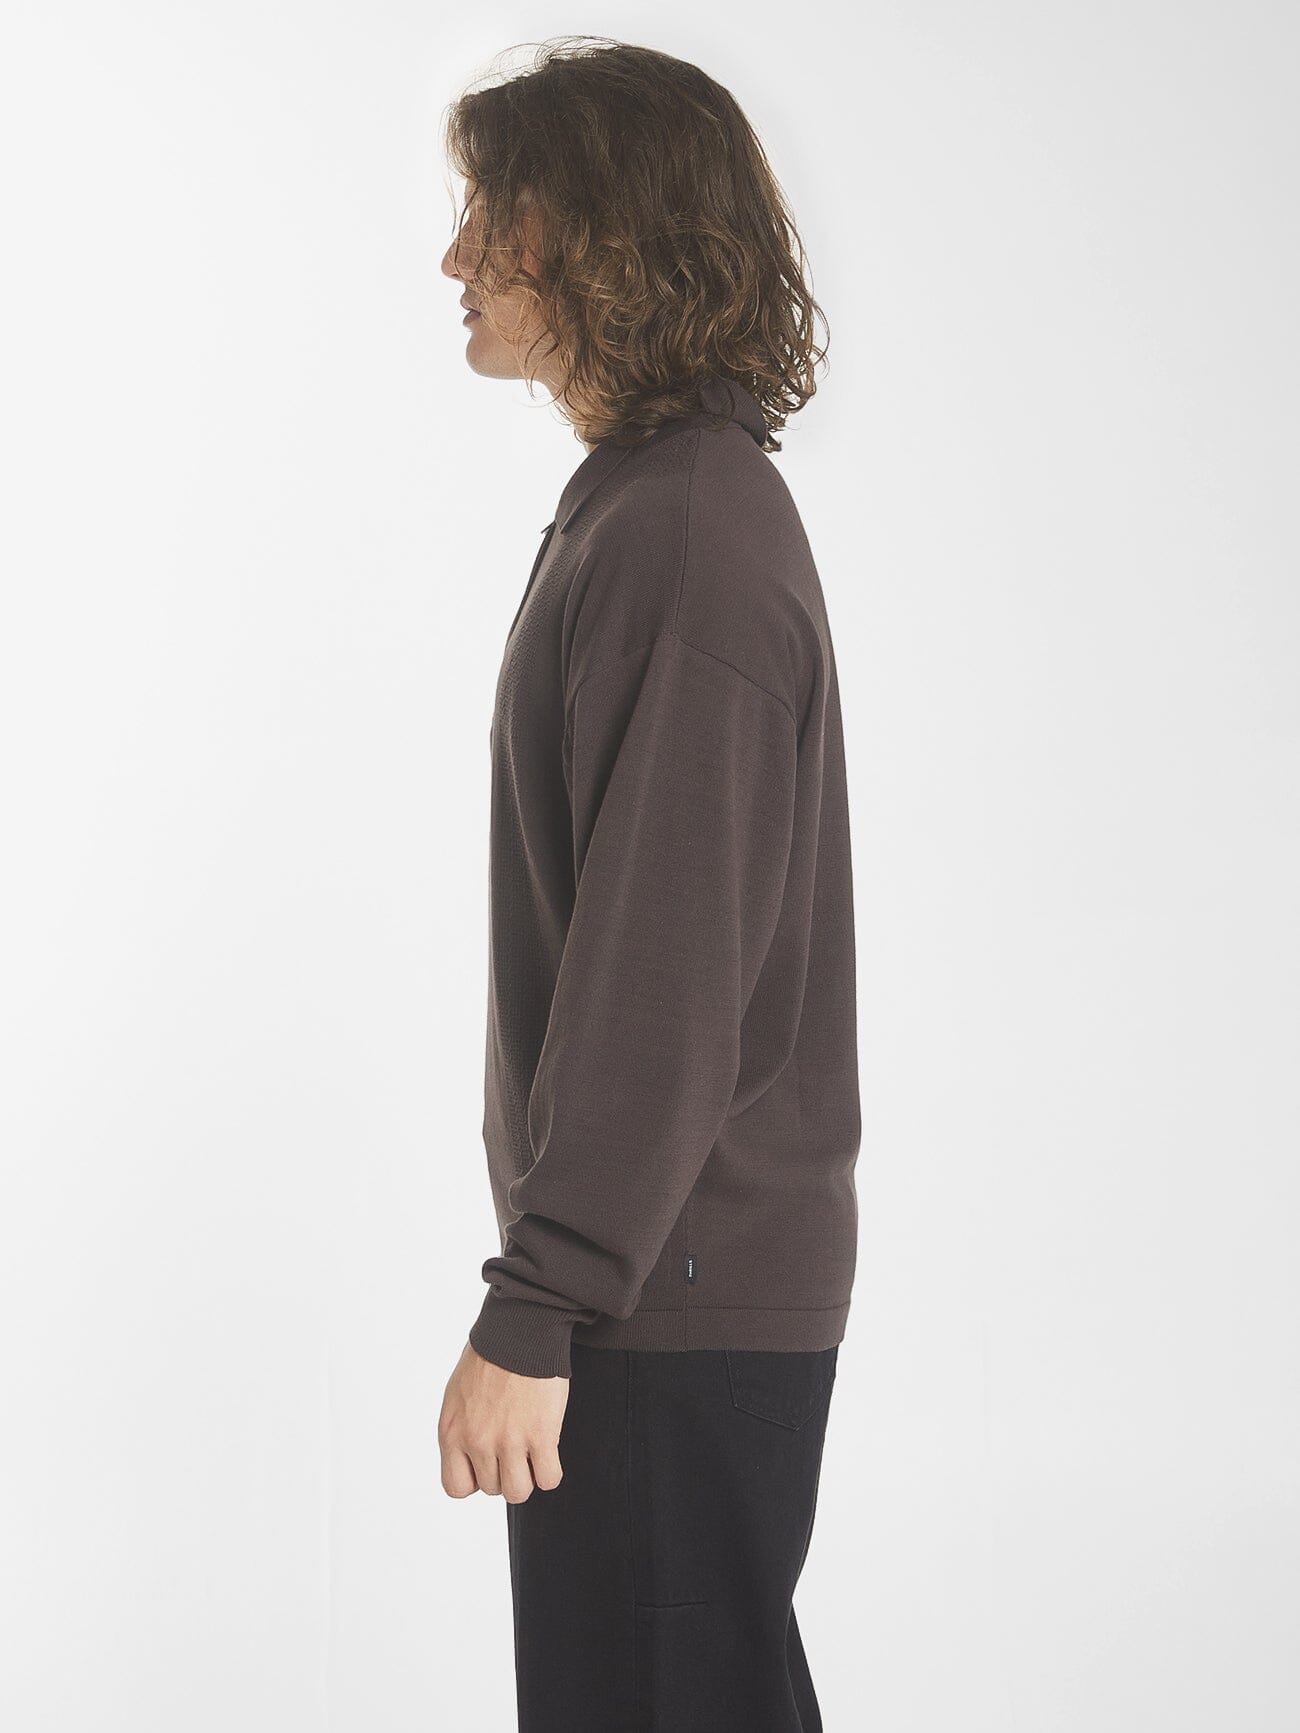 Imperial Jacquard Knit Long Sleeve Polo - Black Coffee XS